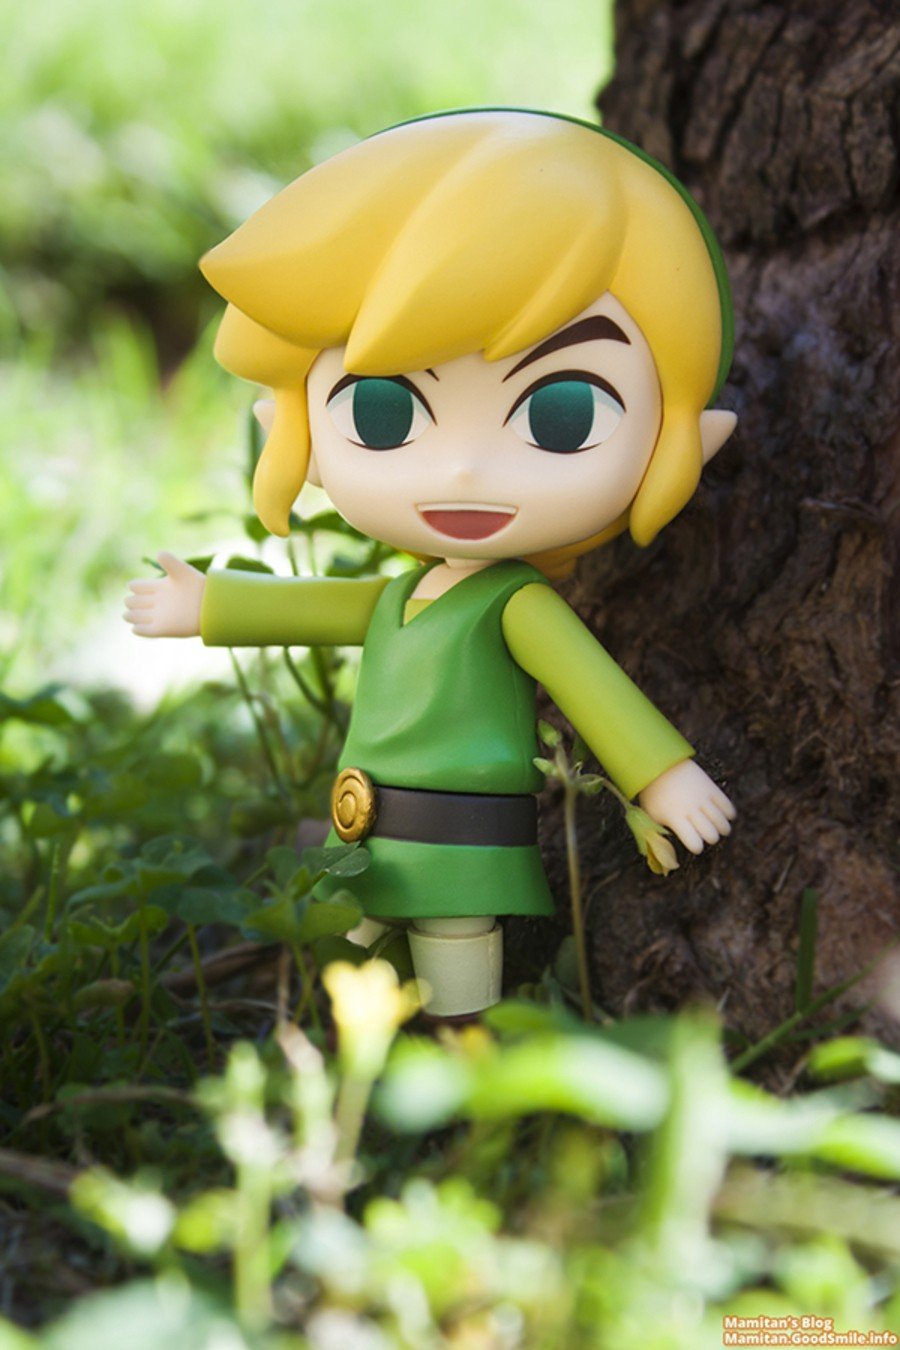 This Super-Cute Toon Link Nendoroid is Looking for Adventure.